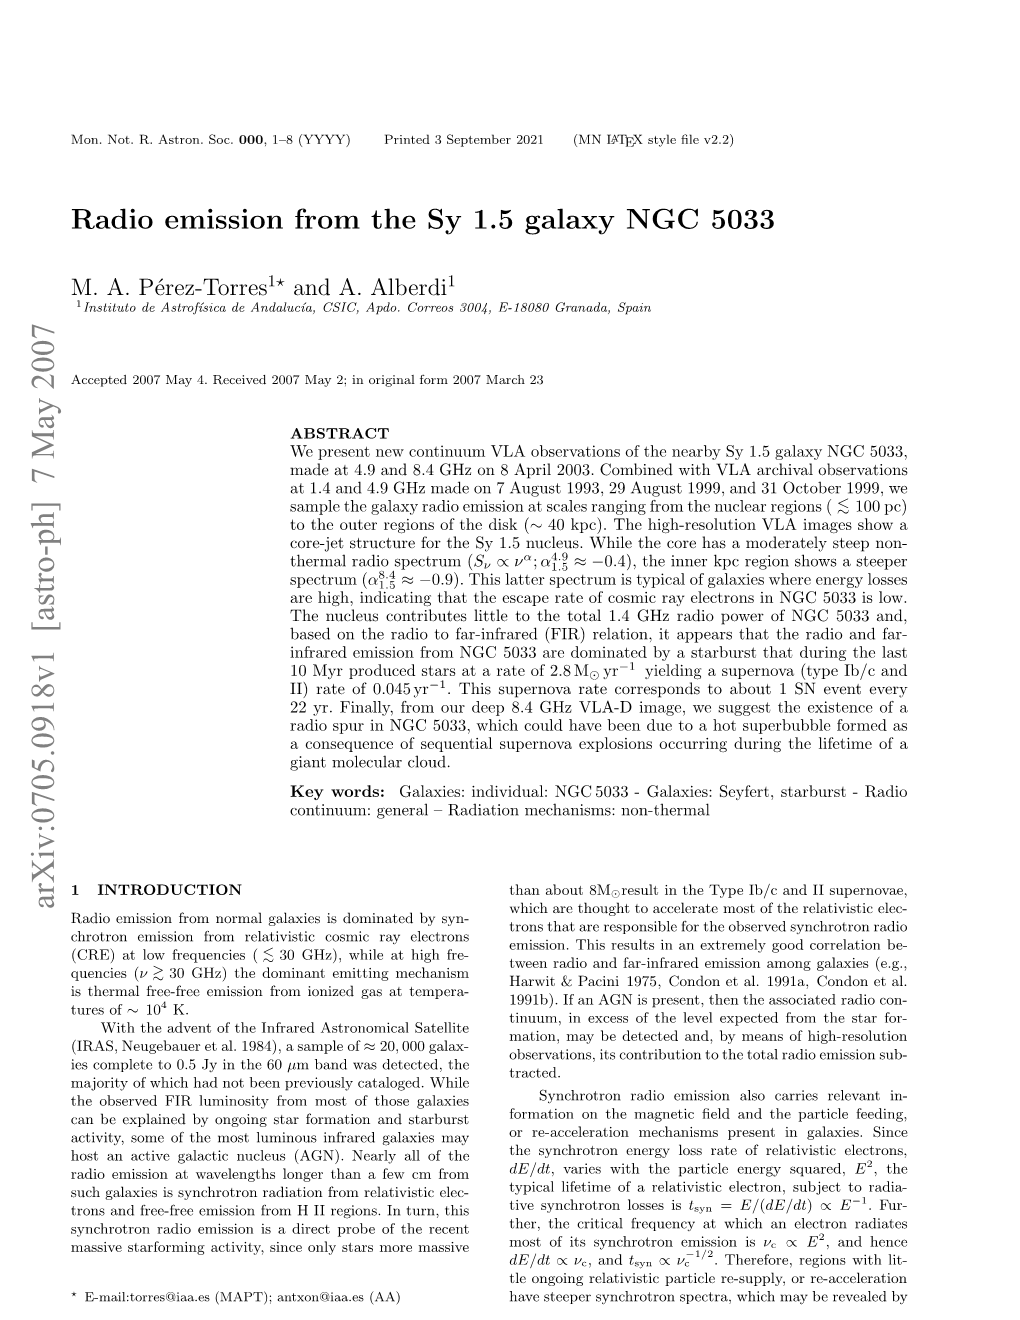 The Continuum Radio Emission from the Sy 1.5 Galaxy NGC 5033 3